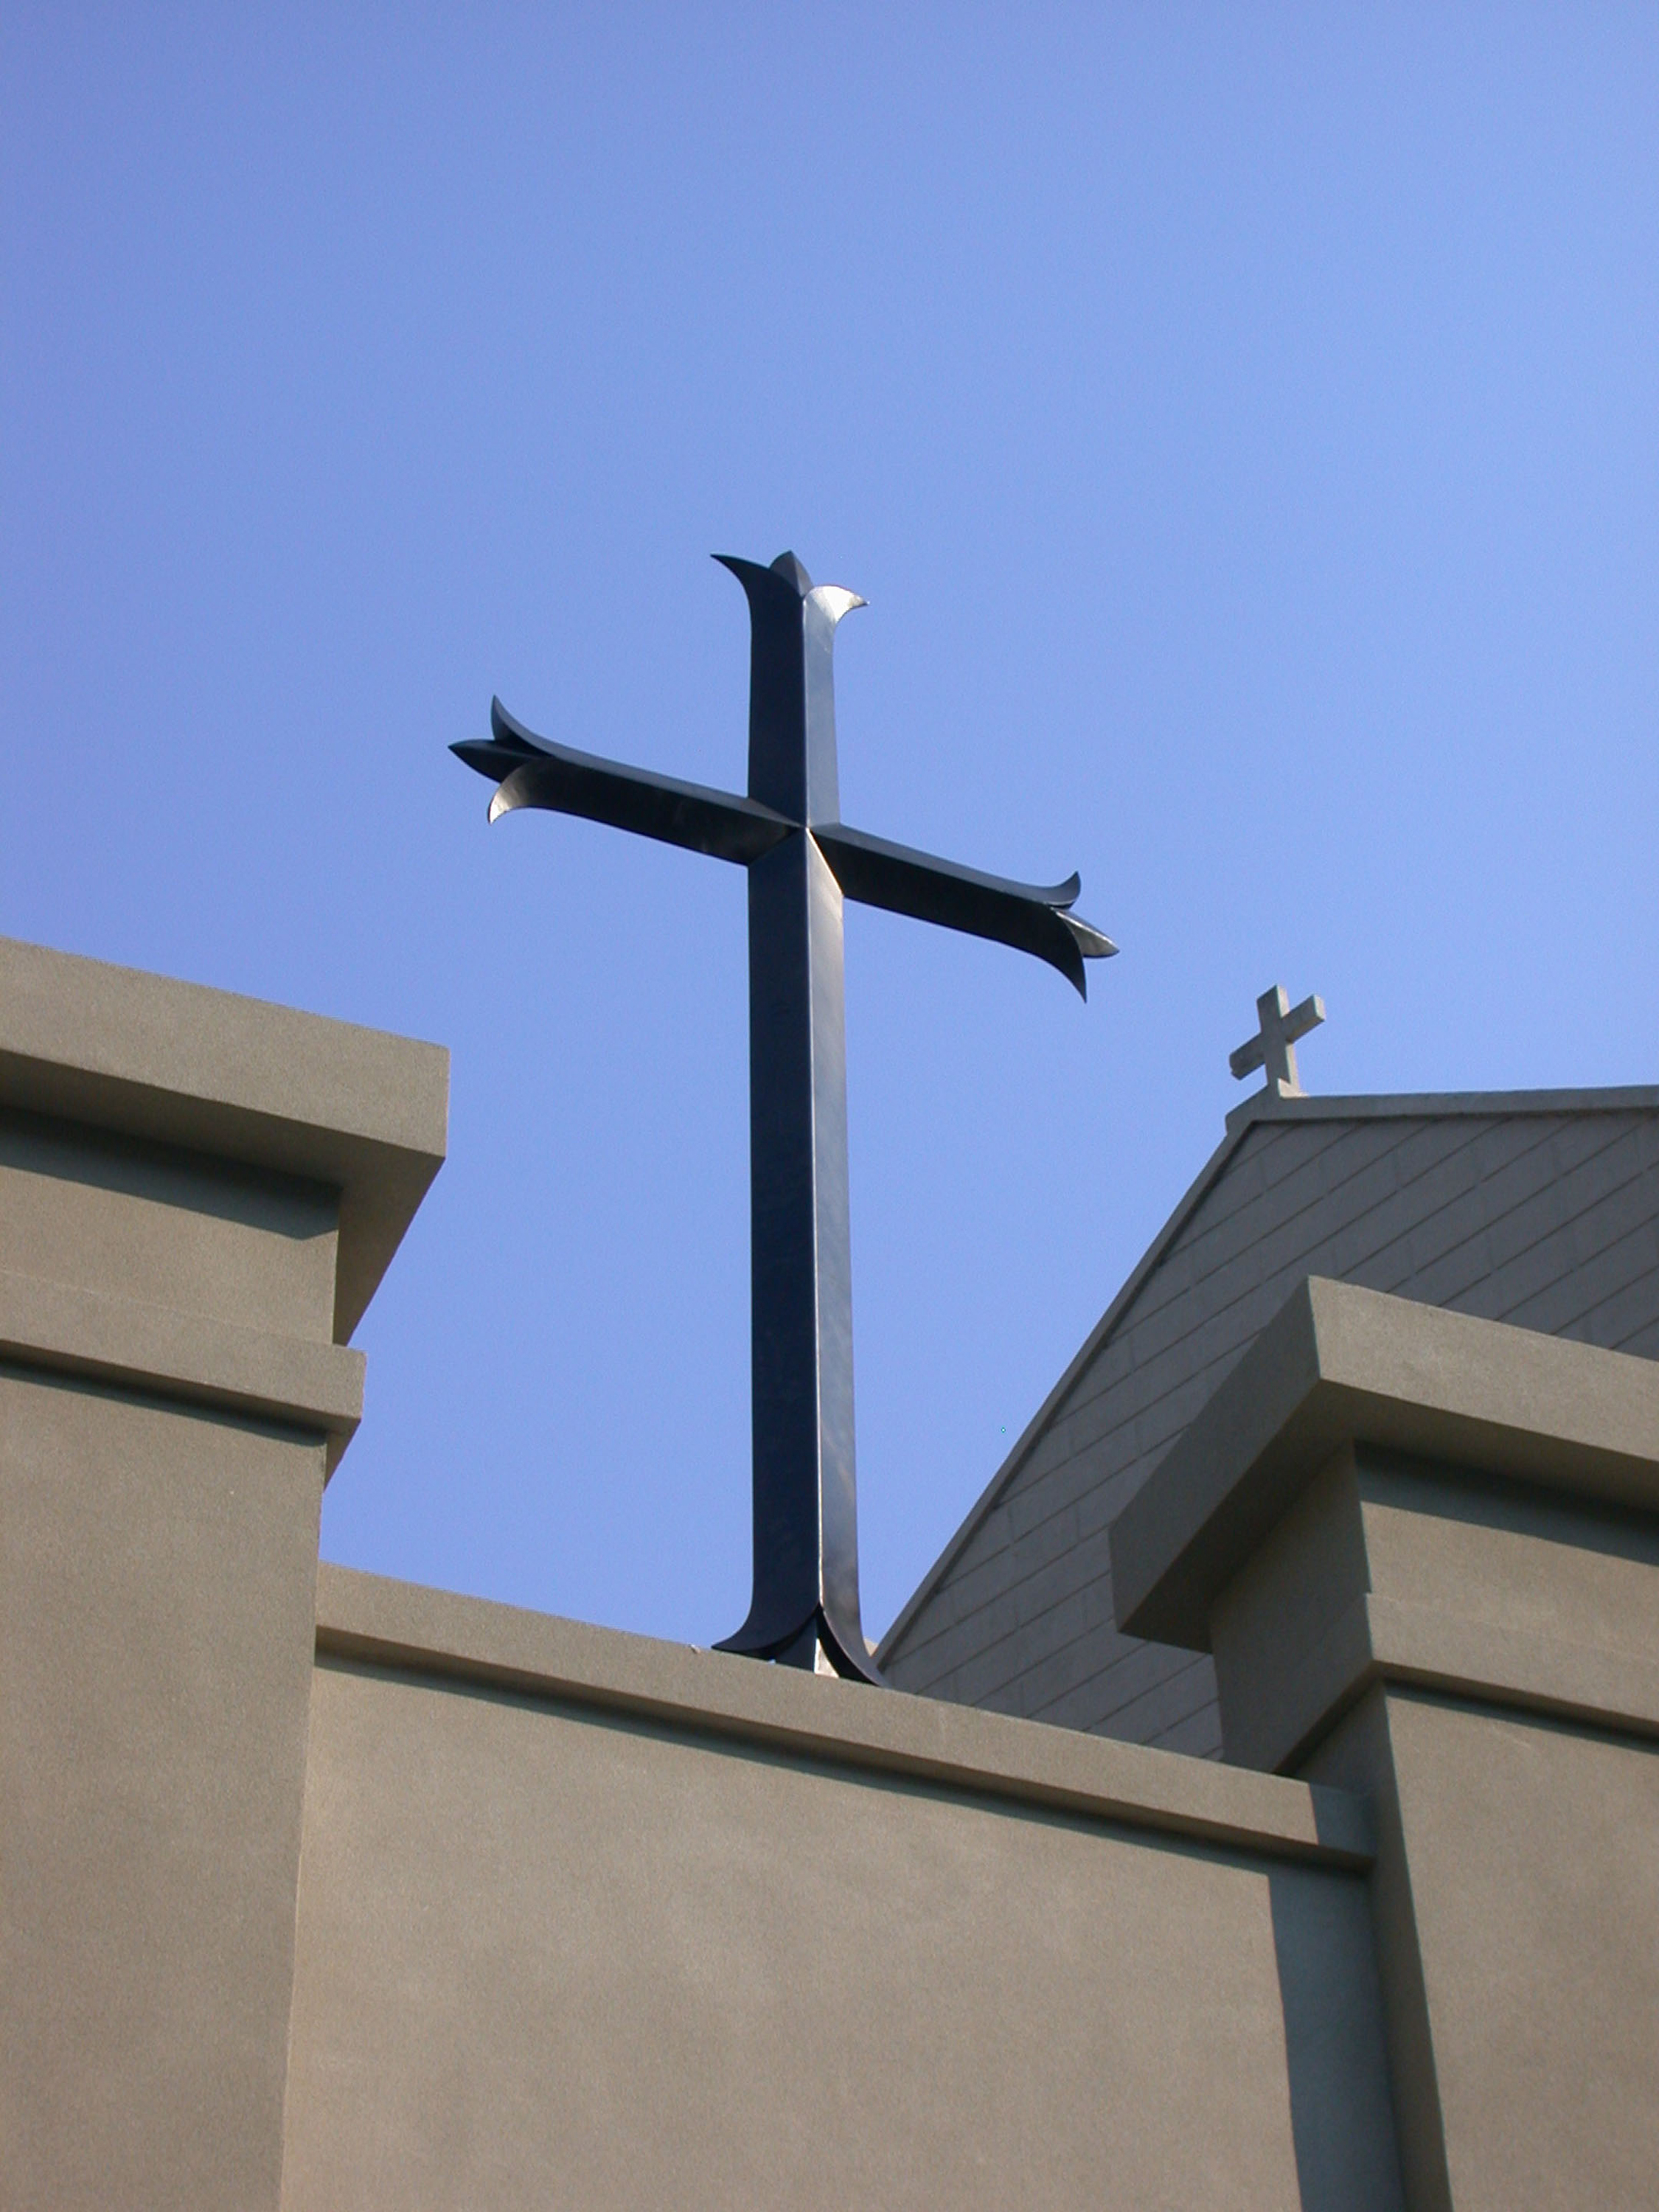  Cross design concept by Chuck Mitchell  Pro bono work developed for St. Martin de Porres National Shrine &amp; Institute, Memphis  Cross fabrication by James A. “ Wally ” Wallace, The Metal Museum, Memphis 